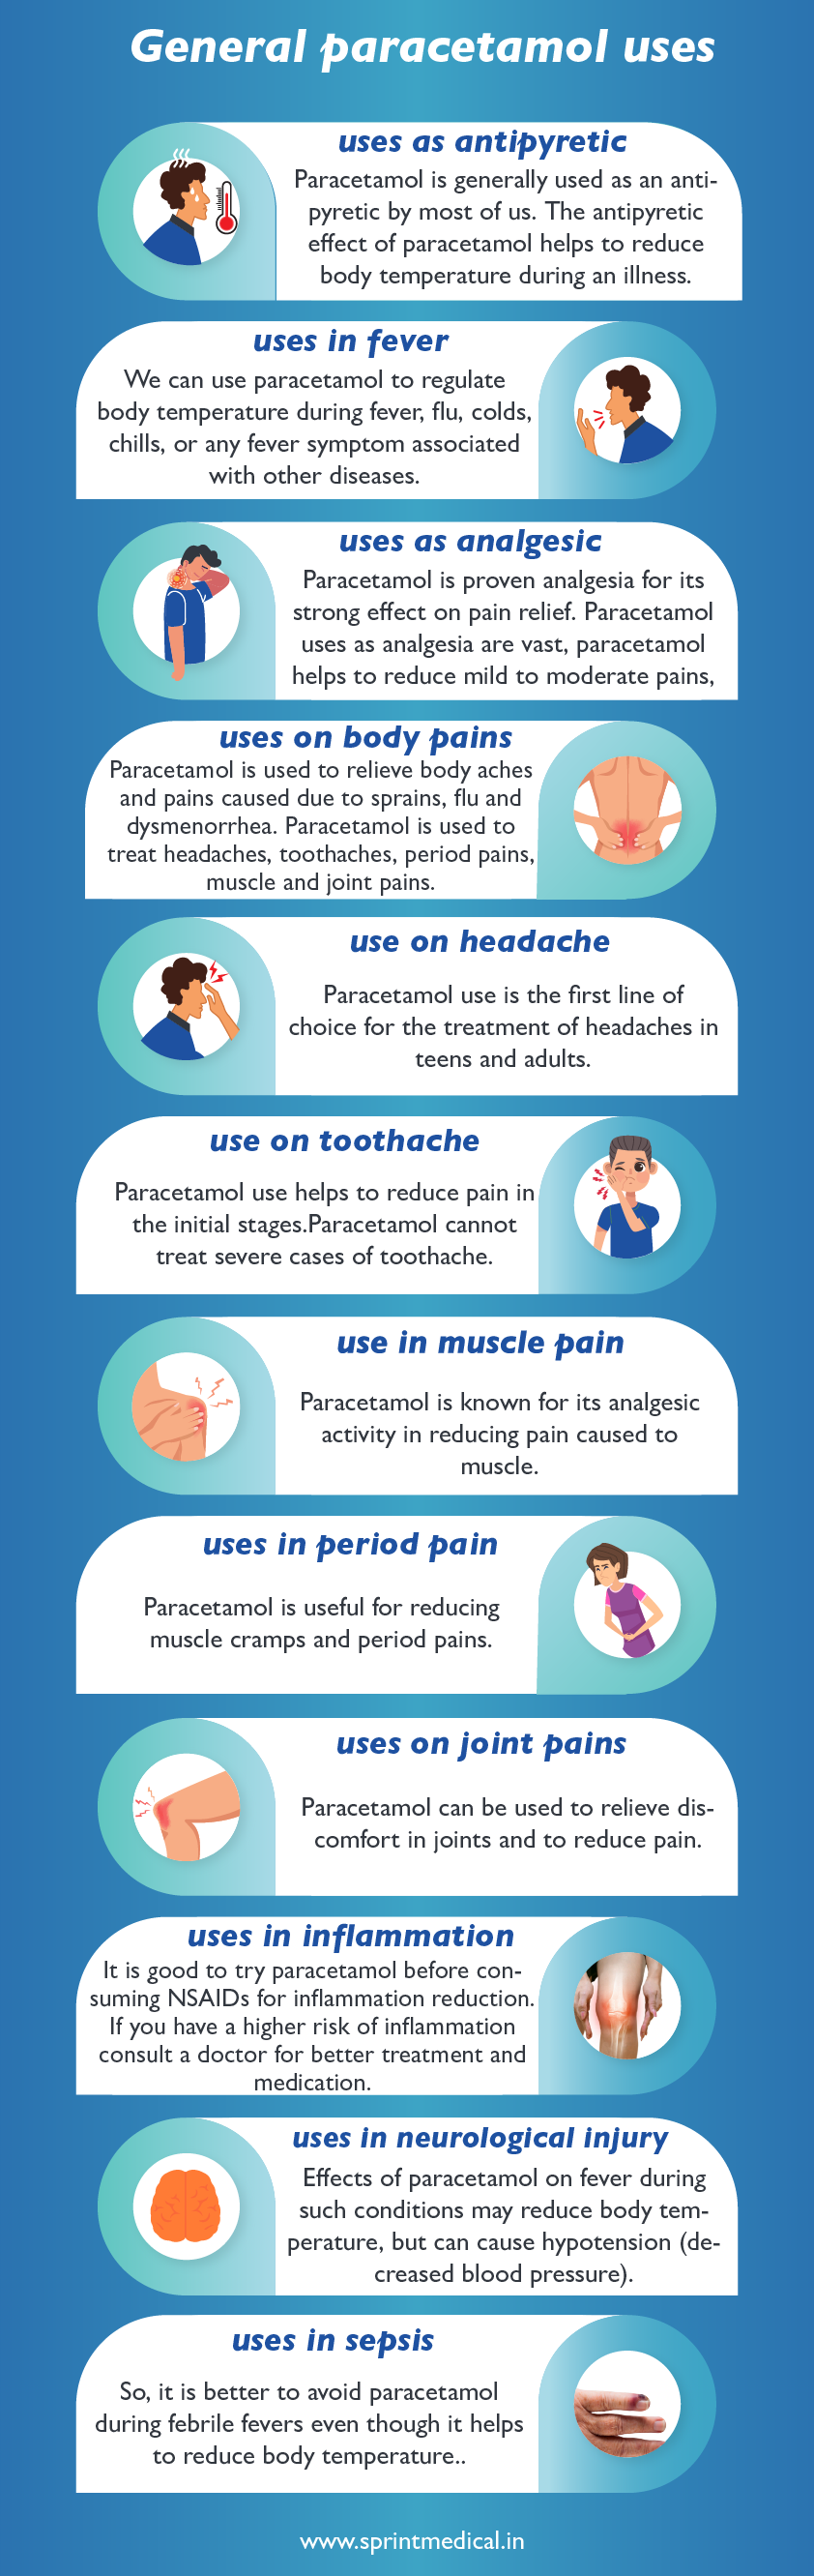 Defining paracetamol, its most common uses and precautions to consider